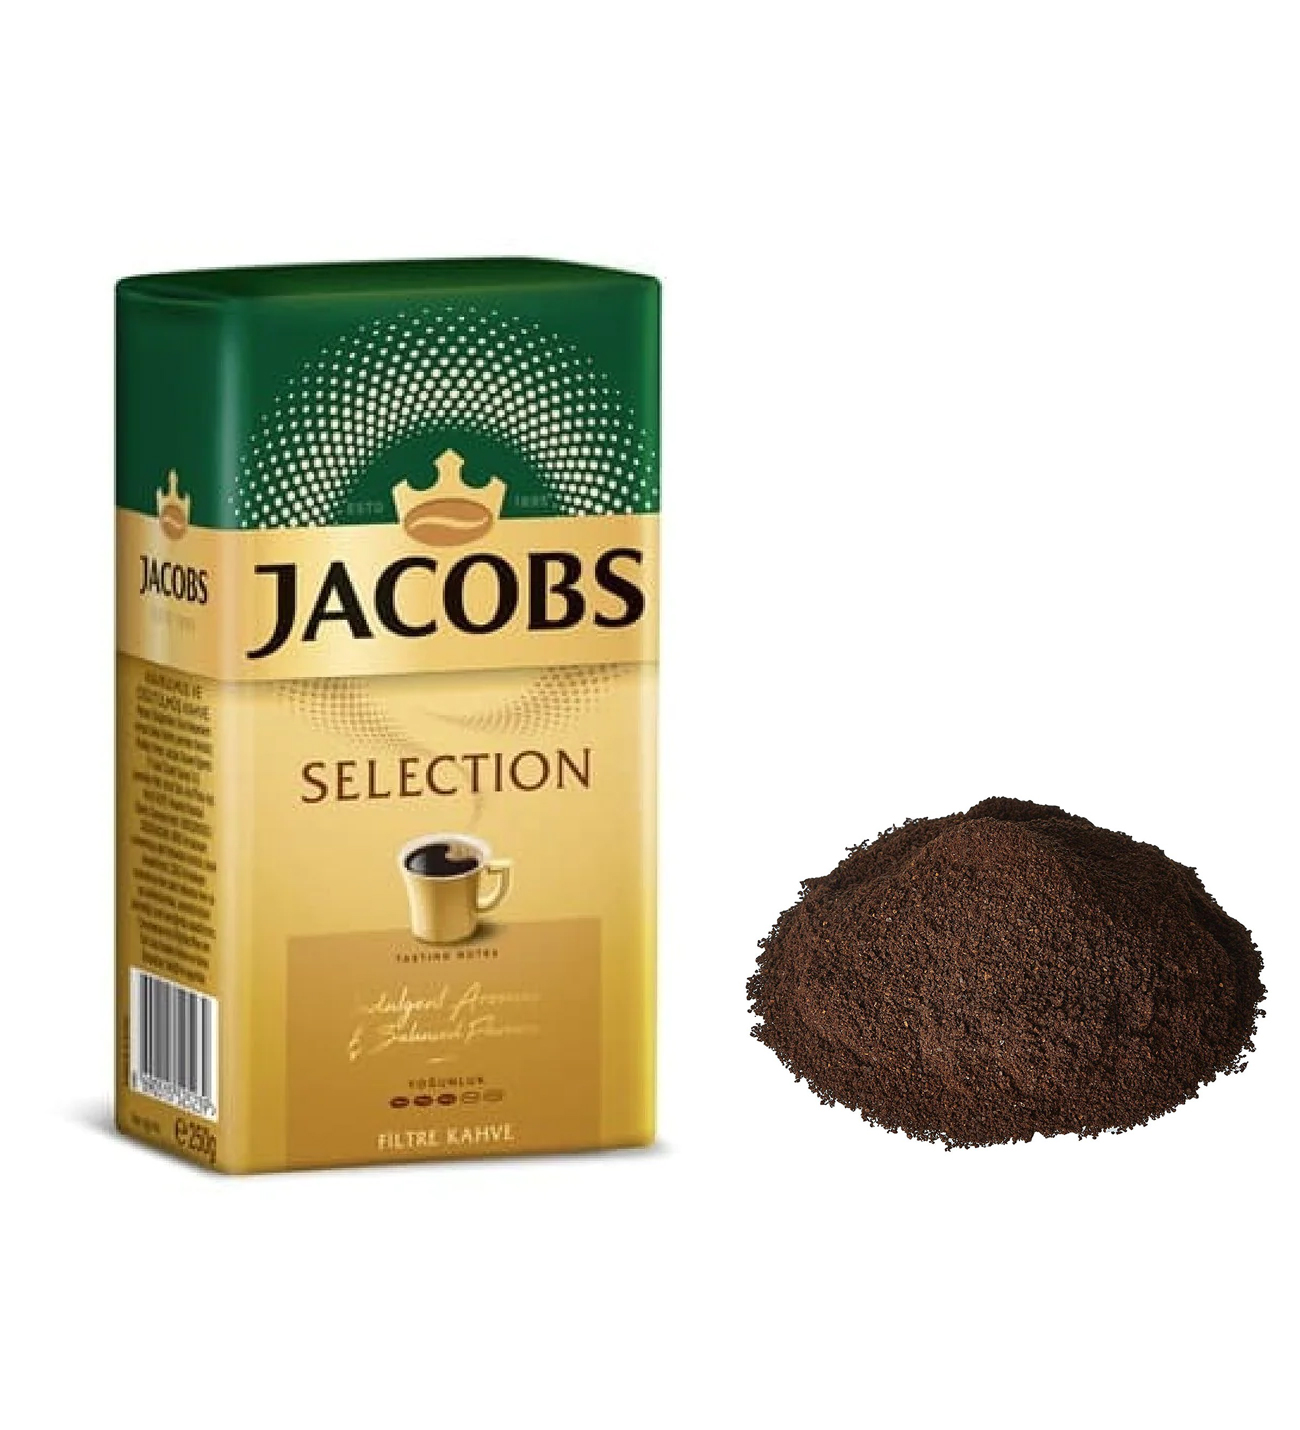 Jacobs selection